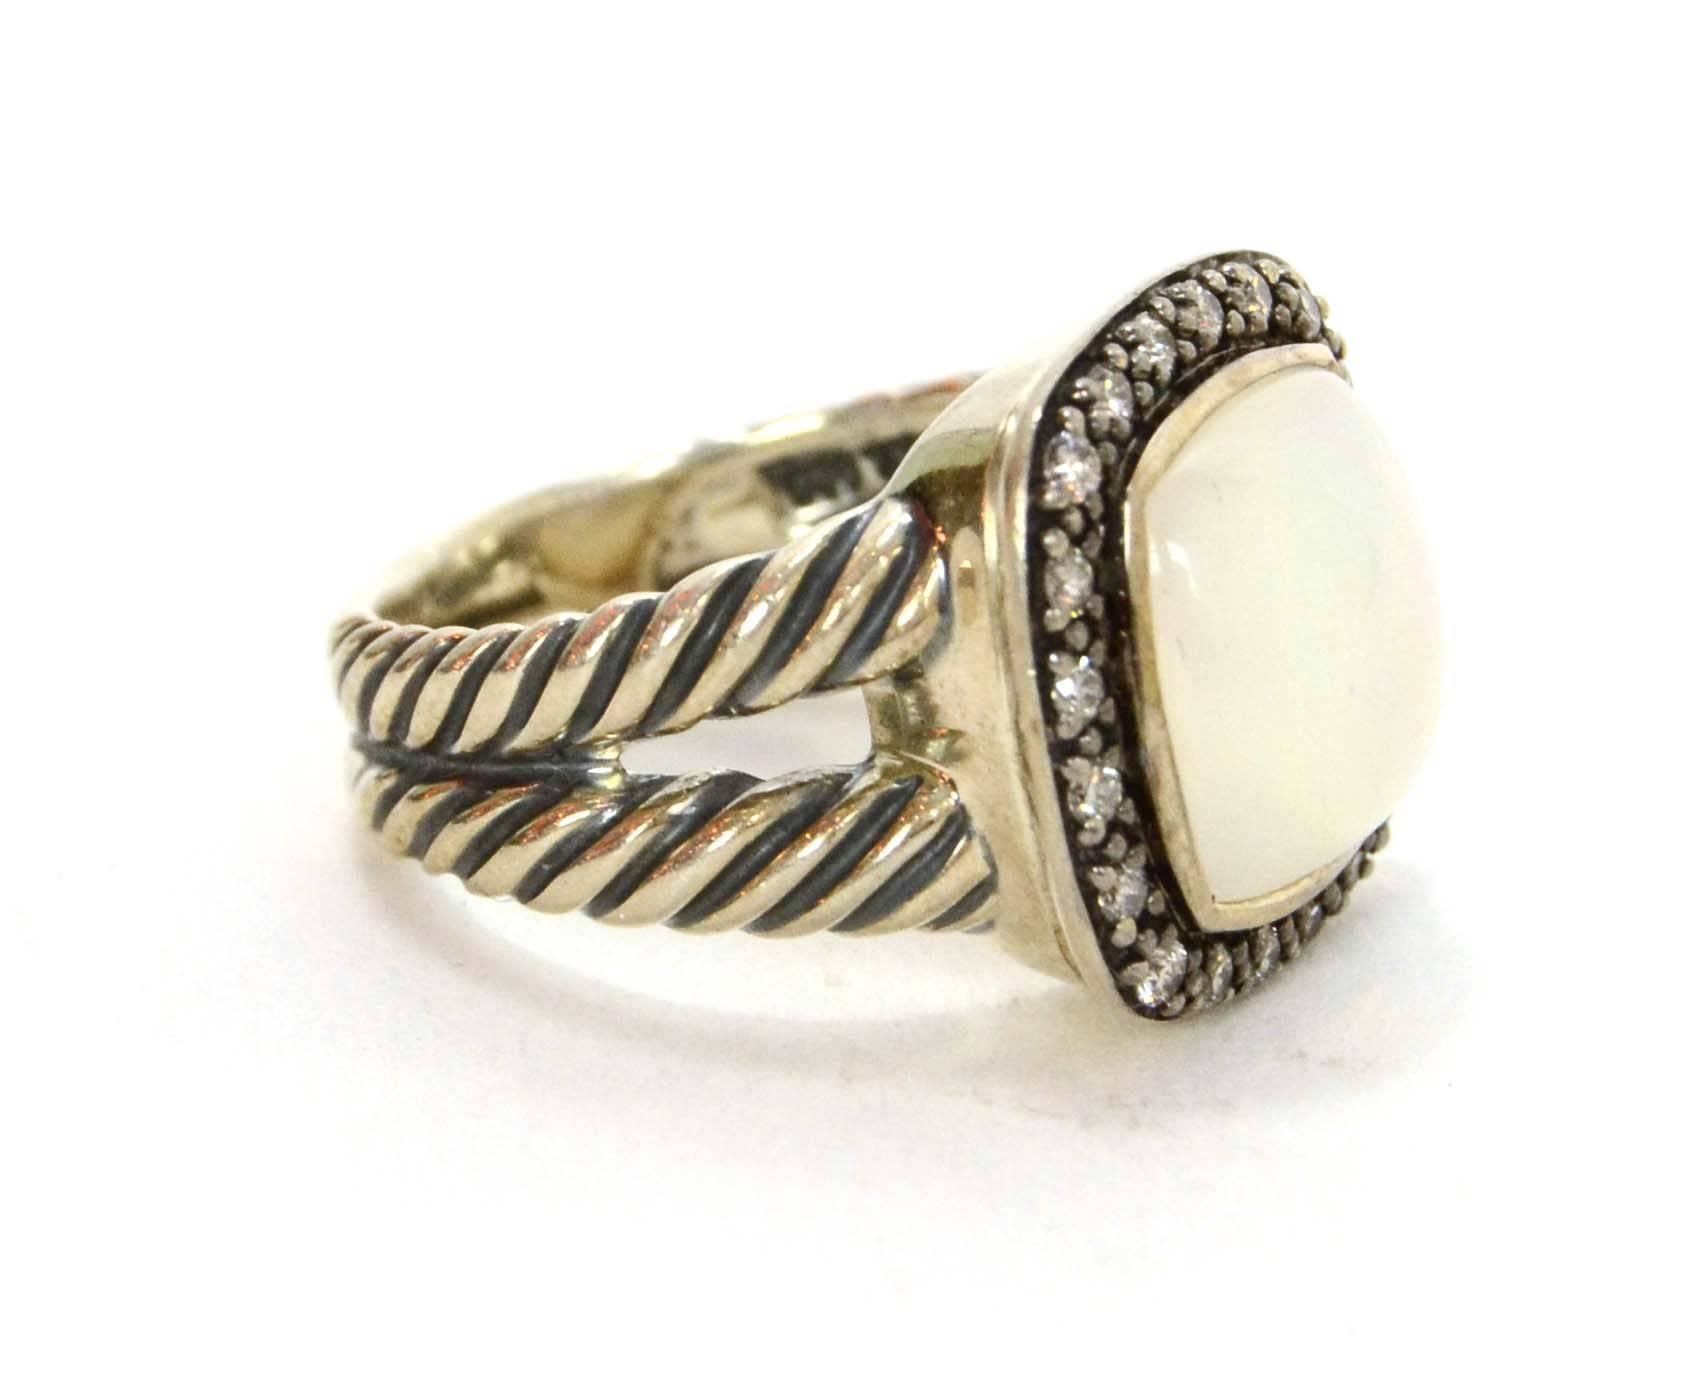 Color: Silver and ivory
•Materials: Sterling silver, diamond and moonstone
•Stamp: DY 925
•Retail Price: $1,125+ tax
•Overall Condition: Excellent pre-owned condition. Light knicks and scratches that are normal within a couple of wears.

Size: